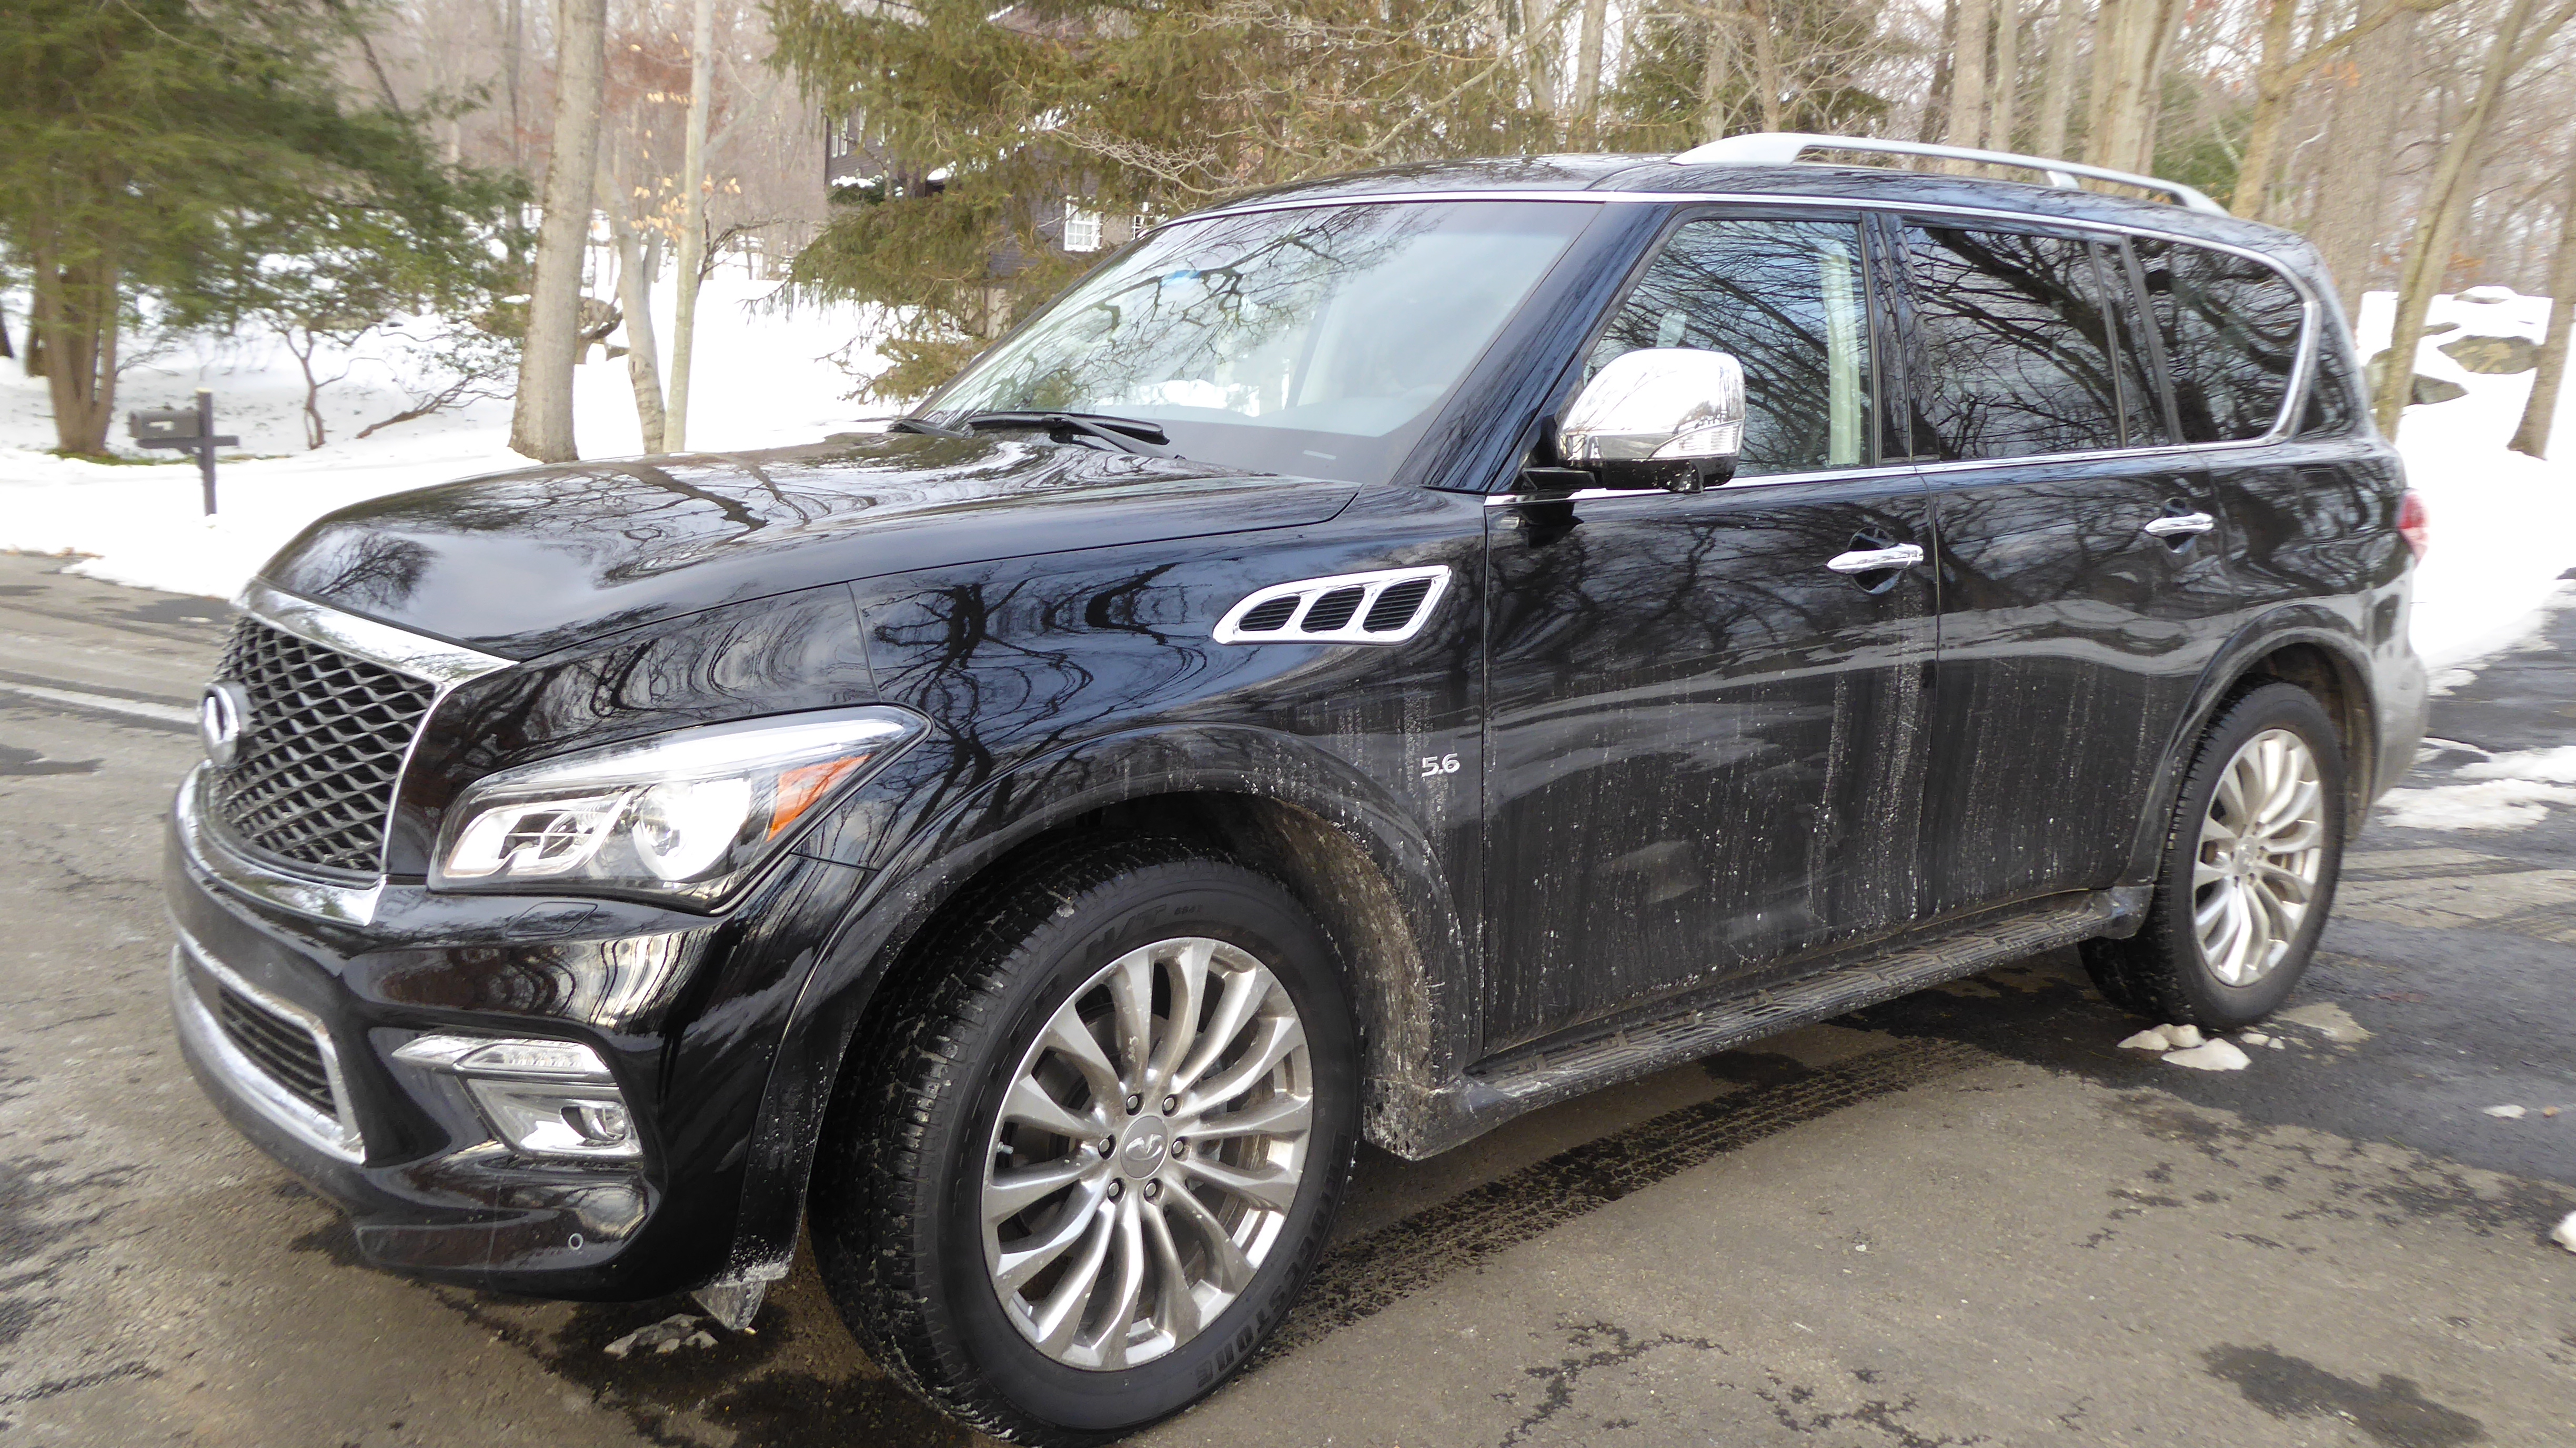 All About That Space 2015 Infiniti Qx80 Review A Girls